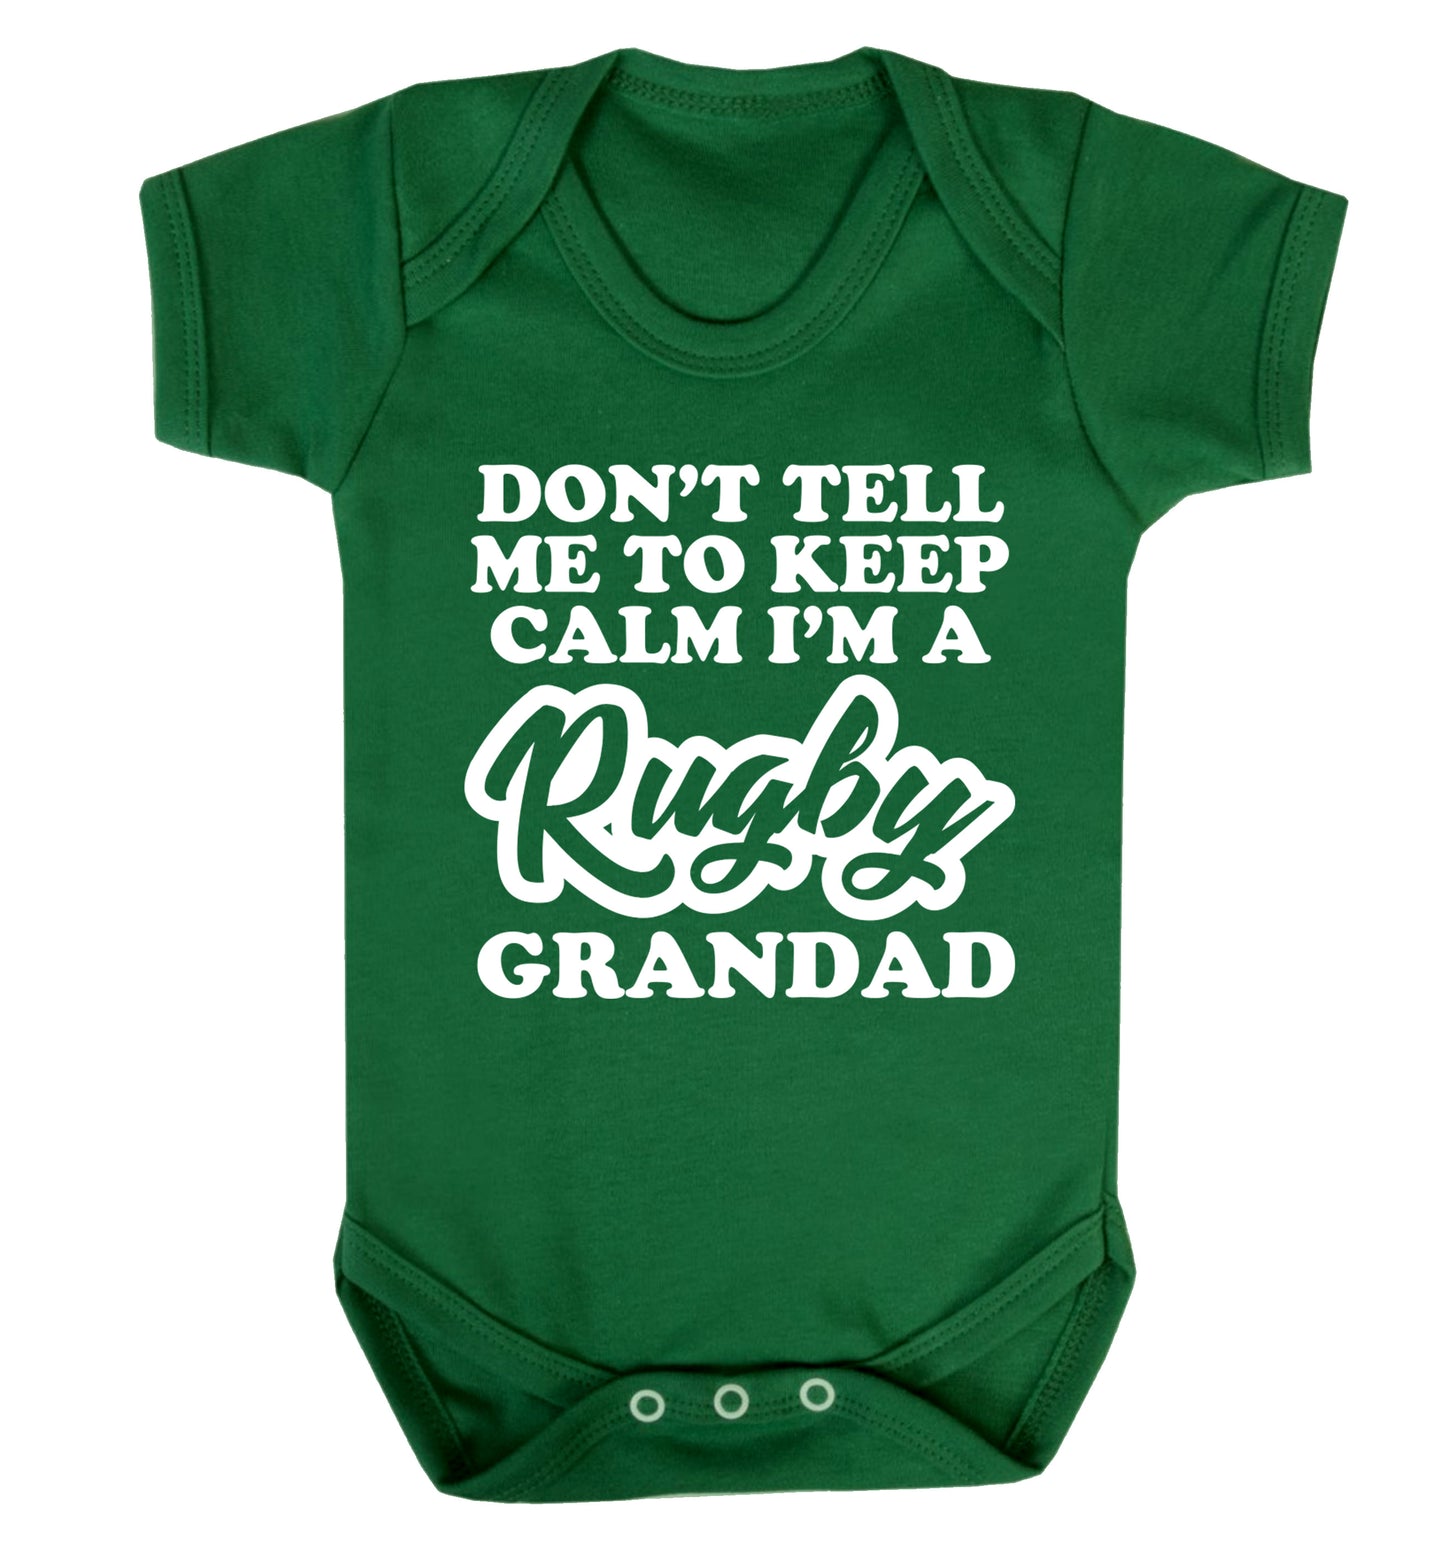 Don't tell me to keep calm I'm a rugby dad Baby Vest green 18-24 months